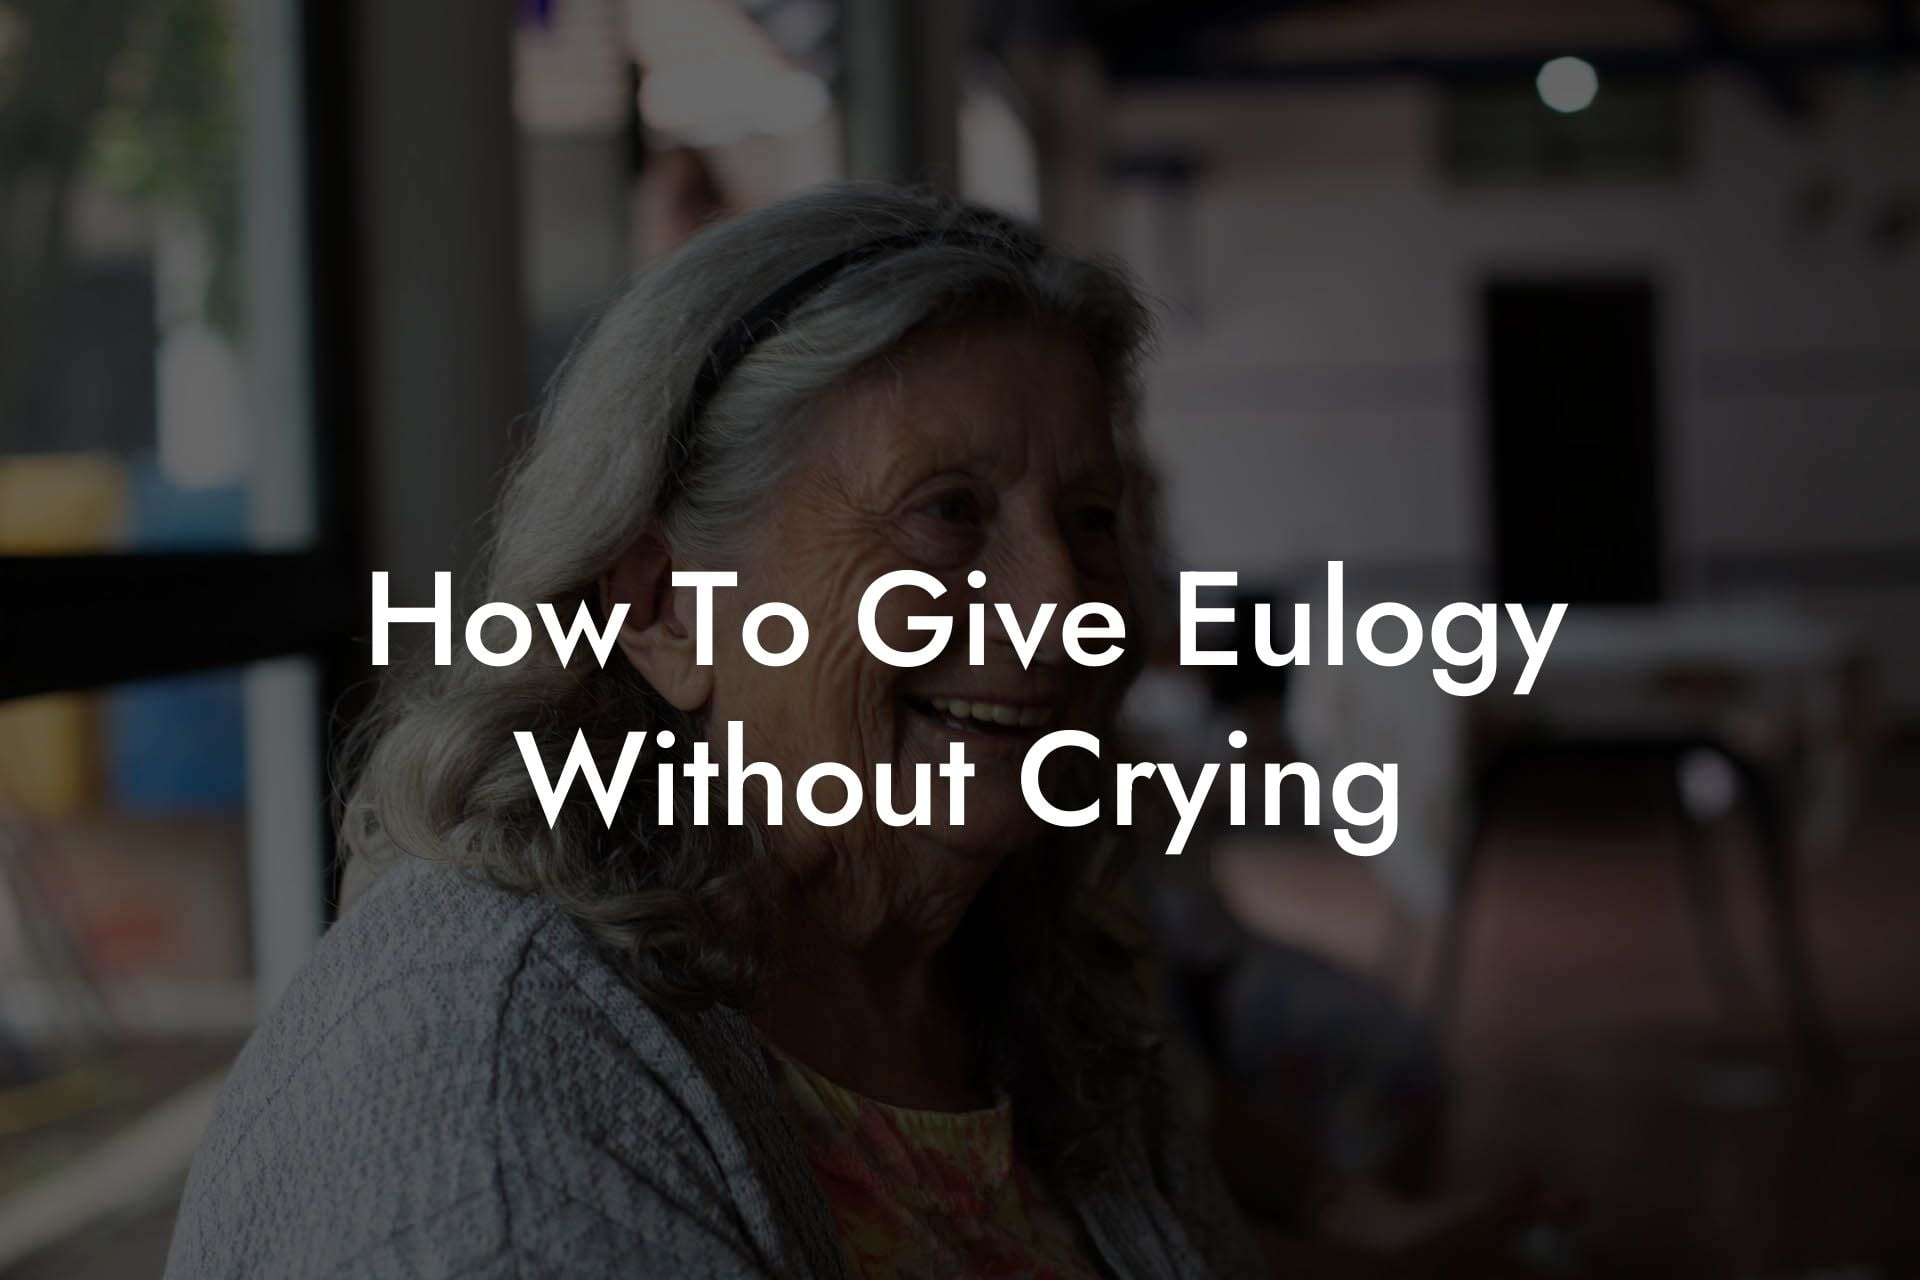 How To Give Eulogy Without Crying